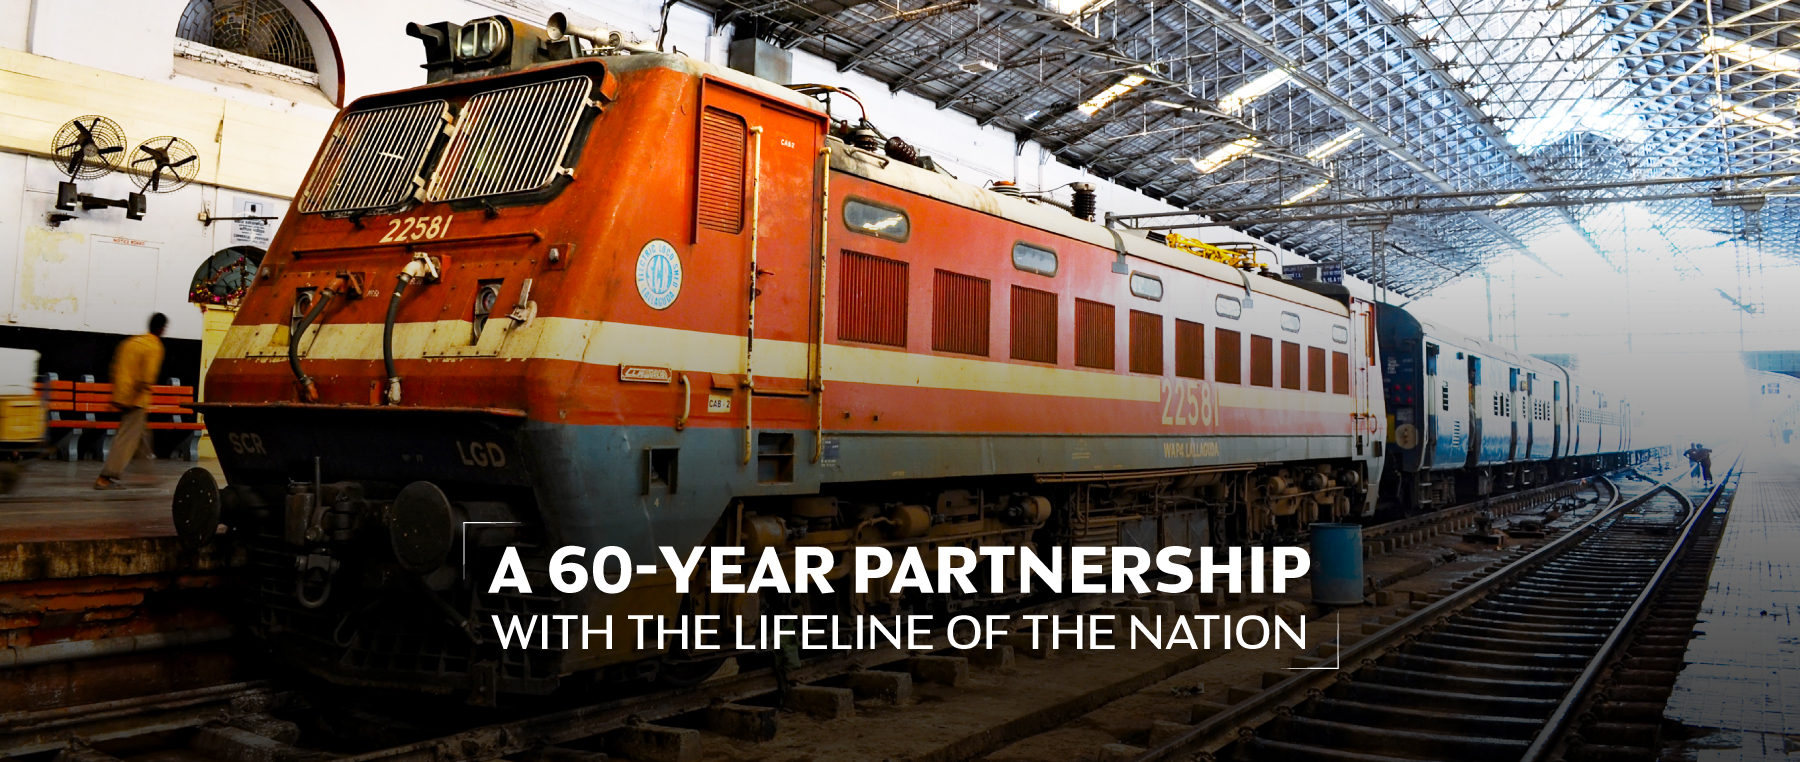 A 60-year partnership with the lifeline of the nation